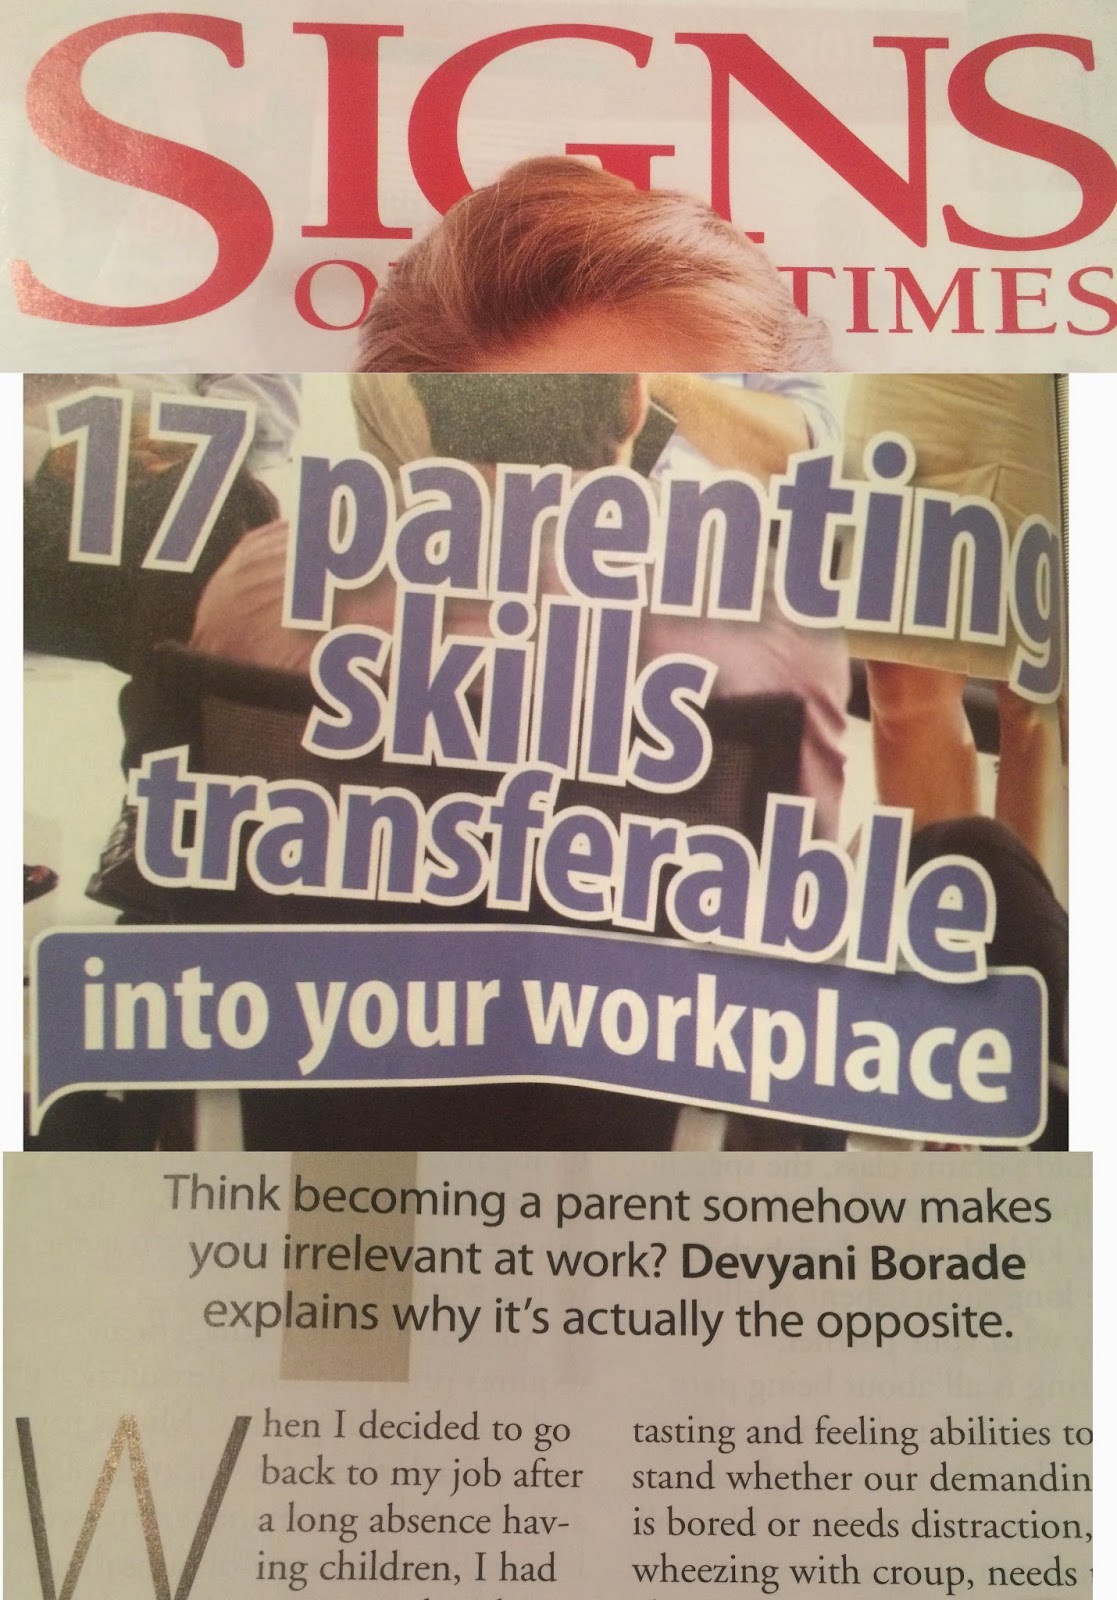 Verbolatry - Devyani Borade - 17 Parenting skills transferable into your workplace - Signs Of The Times